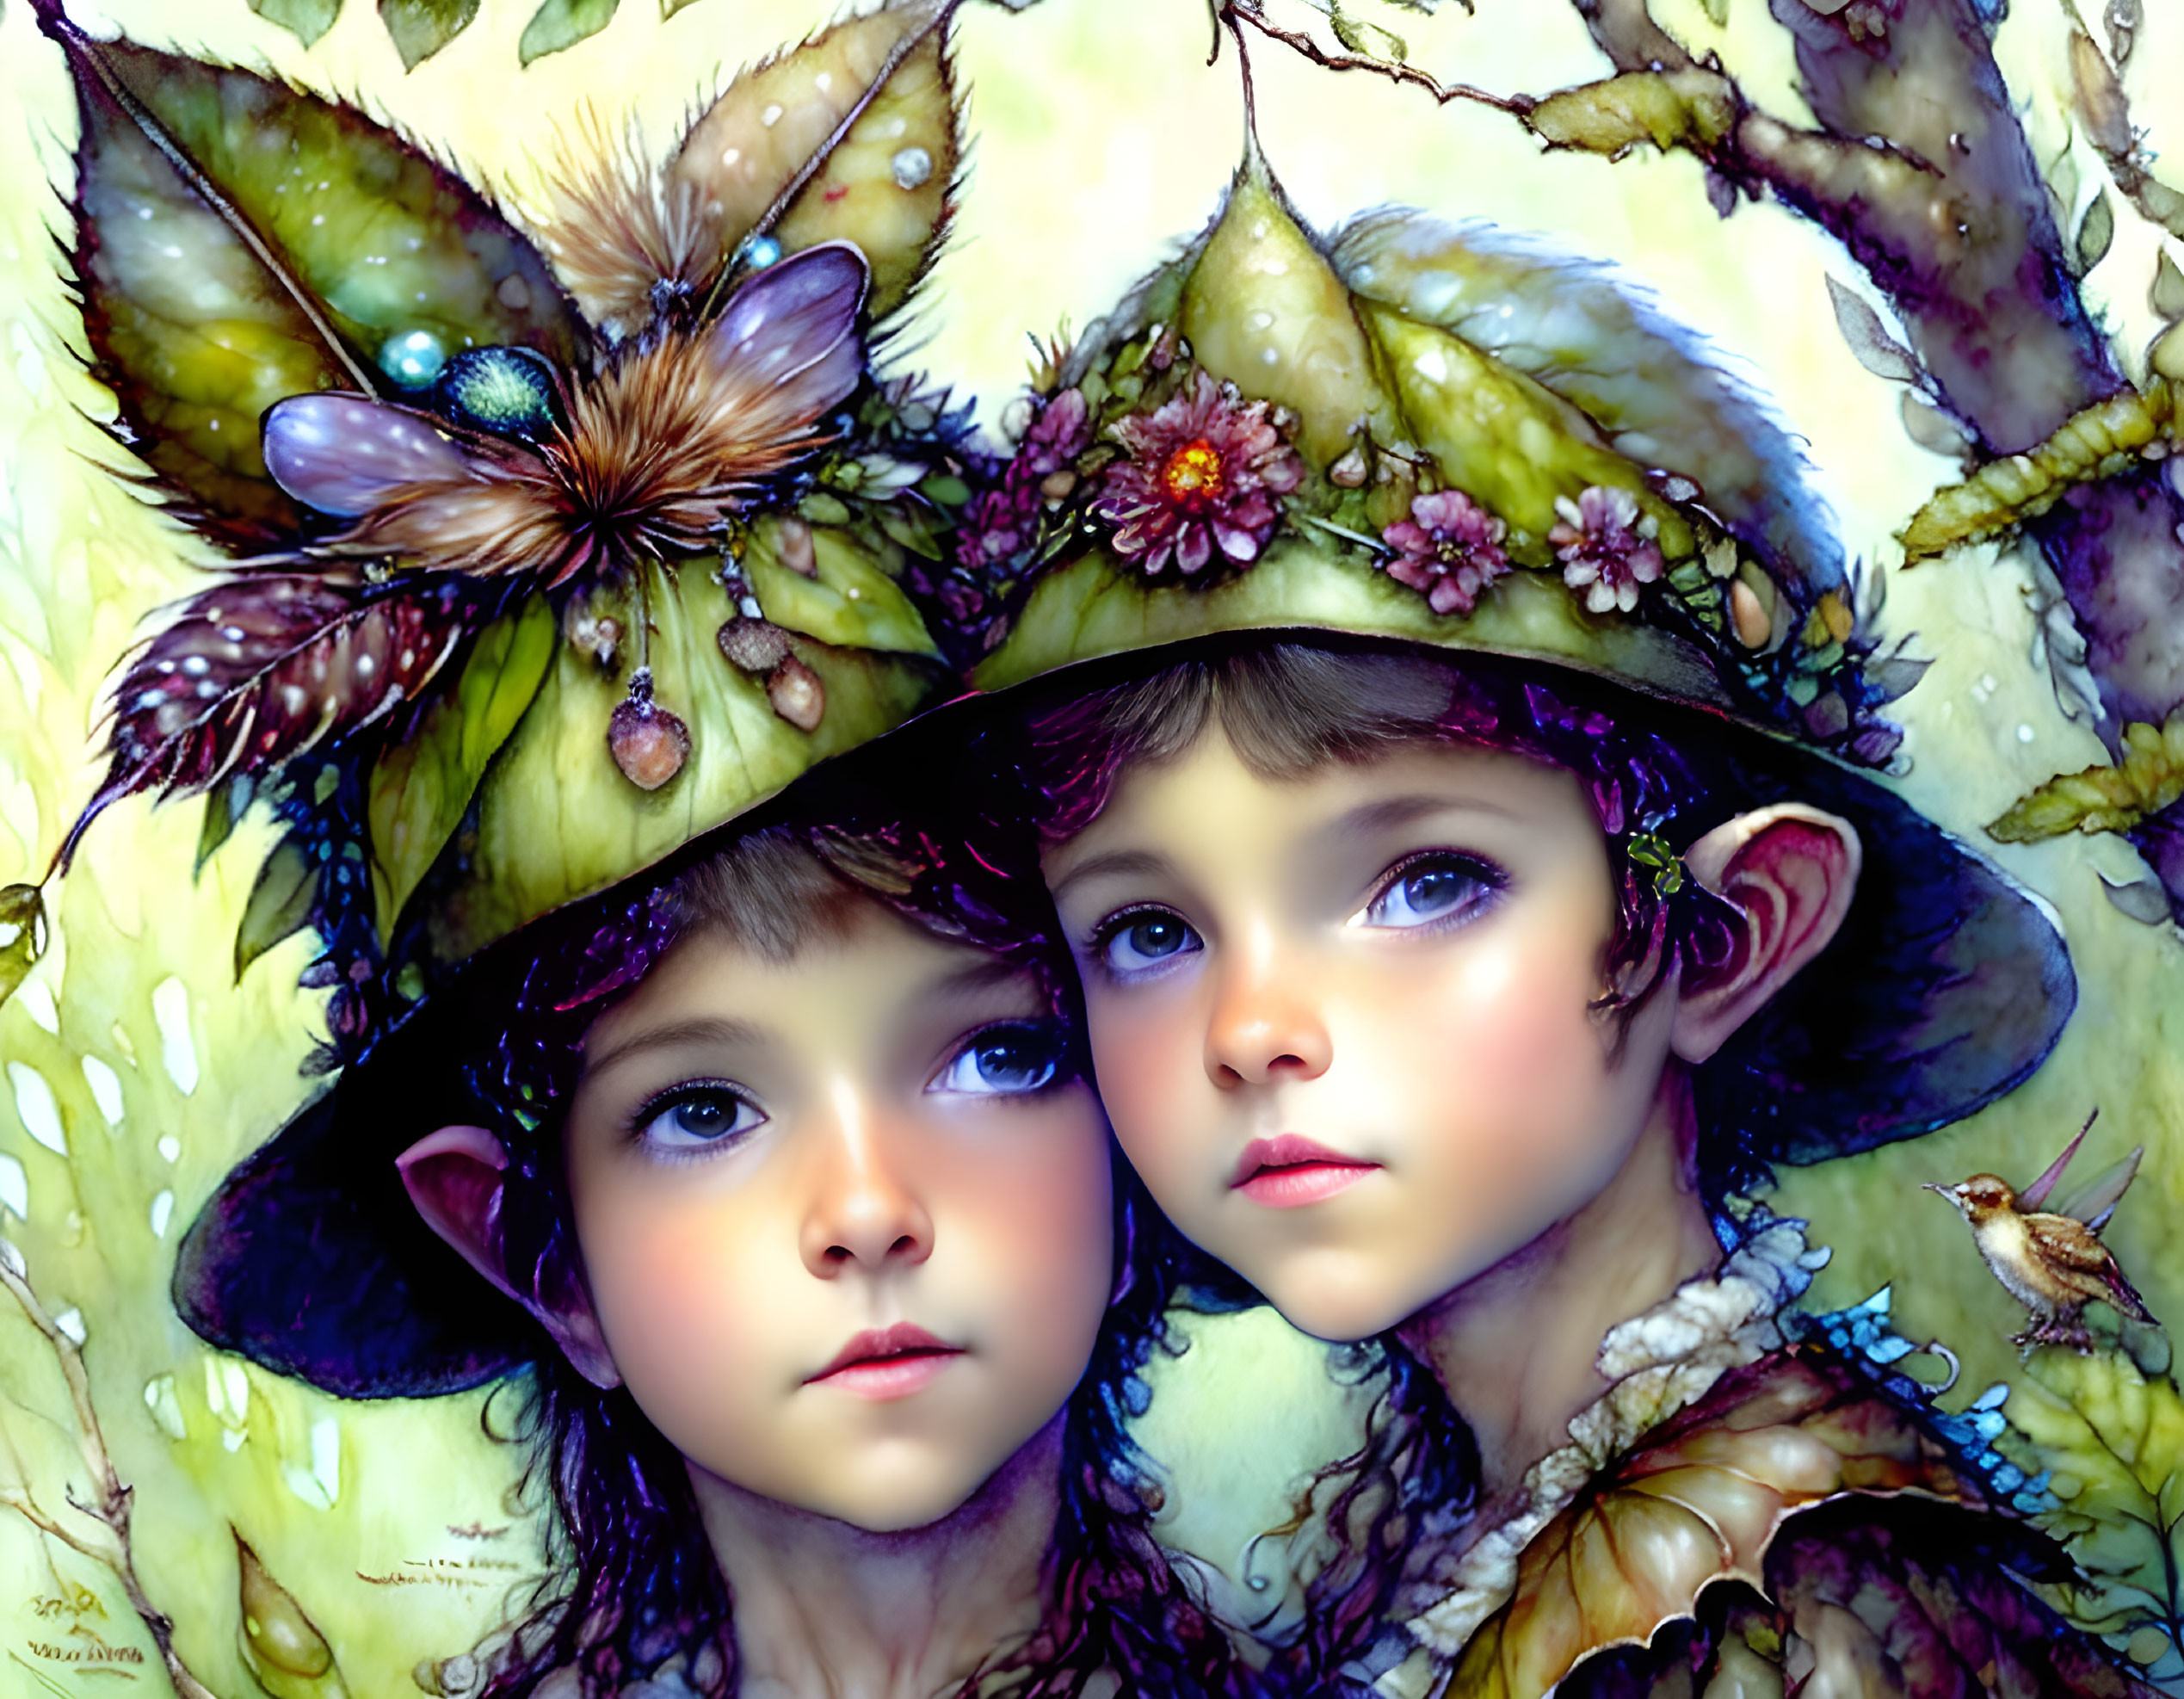 Whimsical children with elfin features surrounded by butterflies and flowers